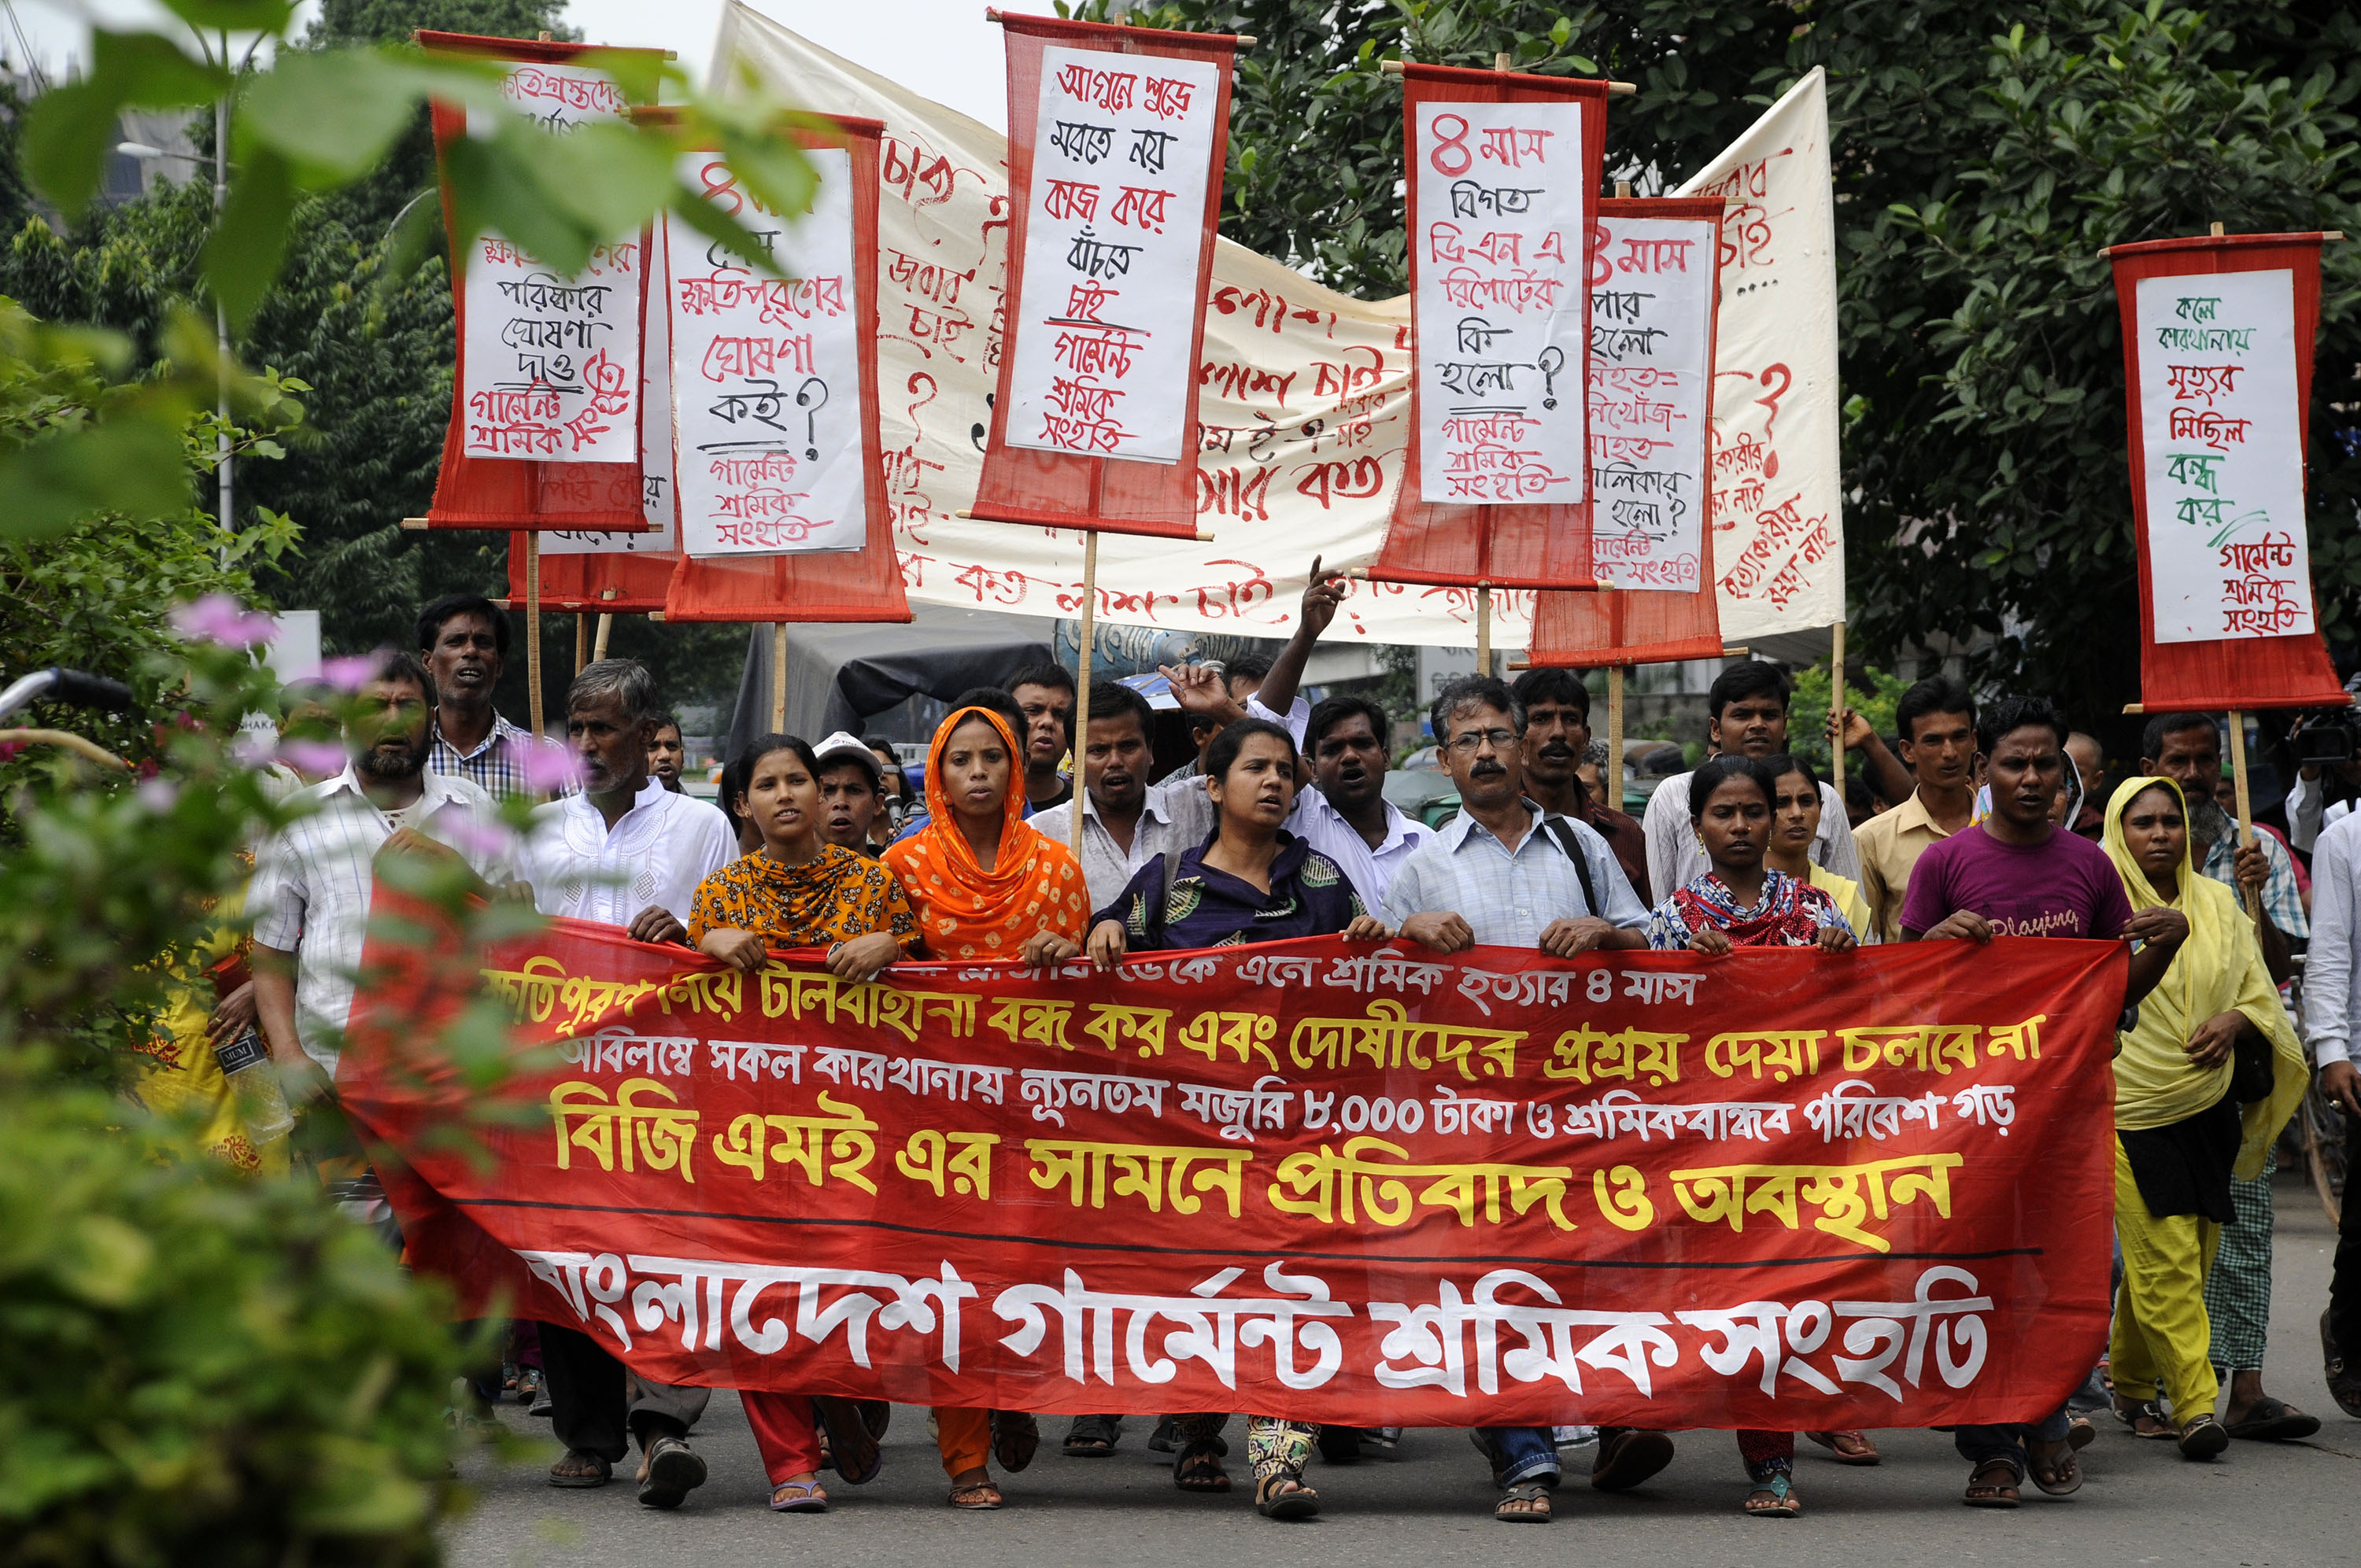 Garment workers shout slogans during An August 24 protest in Dhaka. Relatives of missing garment workers from the Rana Plaza collapse say they are still waiting for compensation four months after the accident. Photo: Xinhua